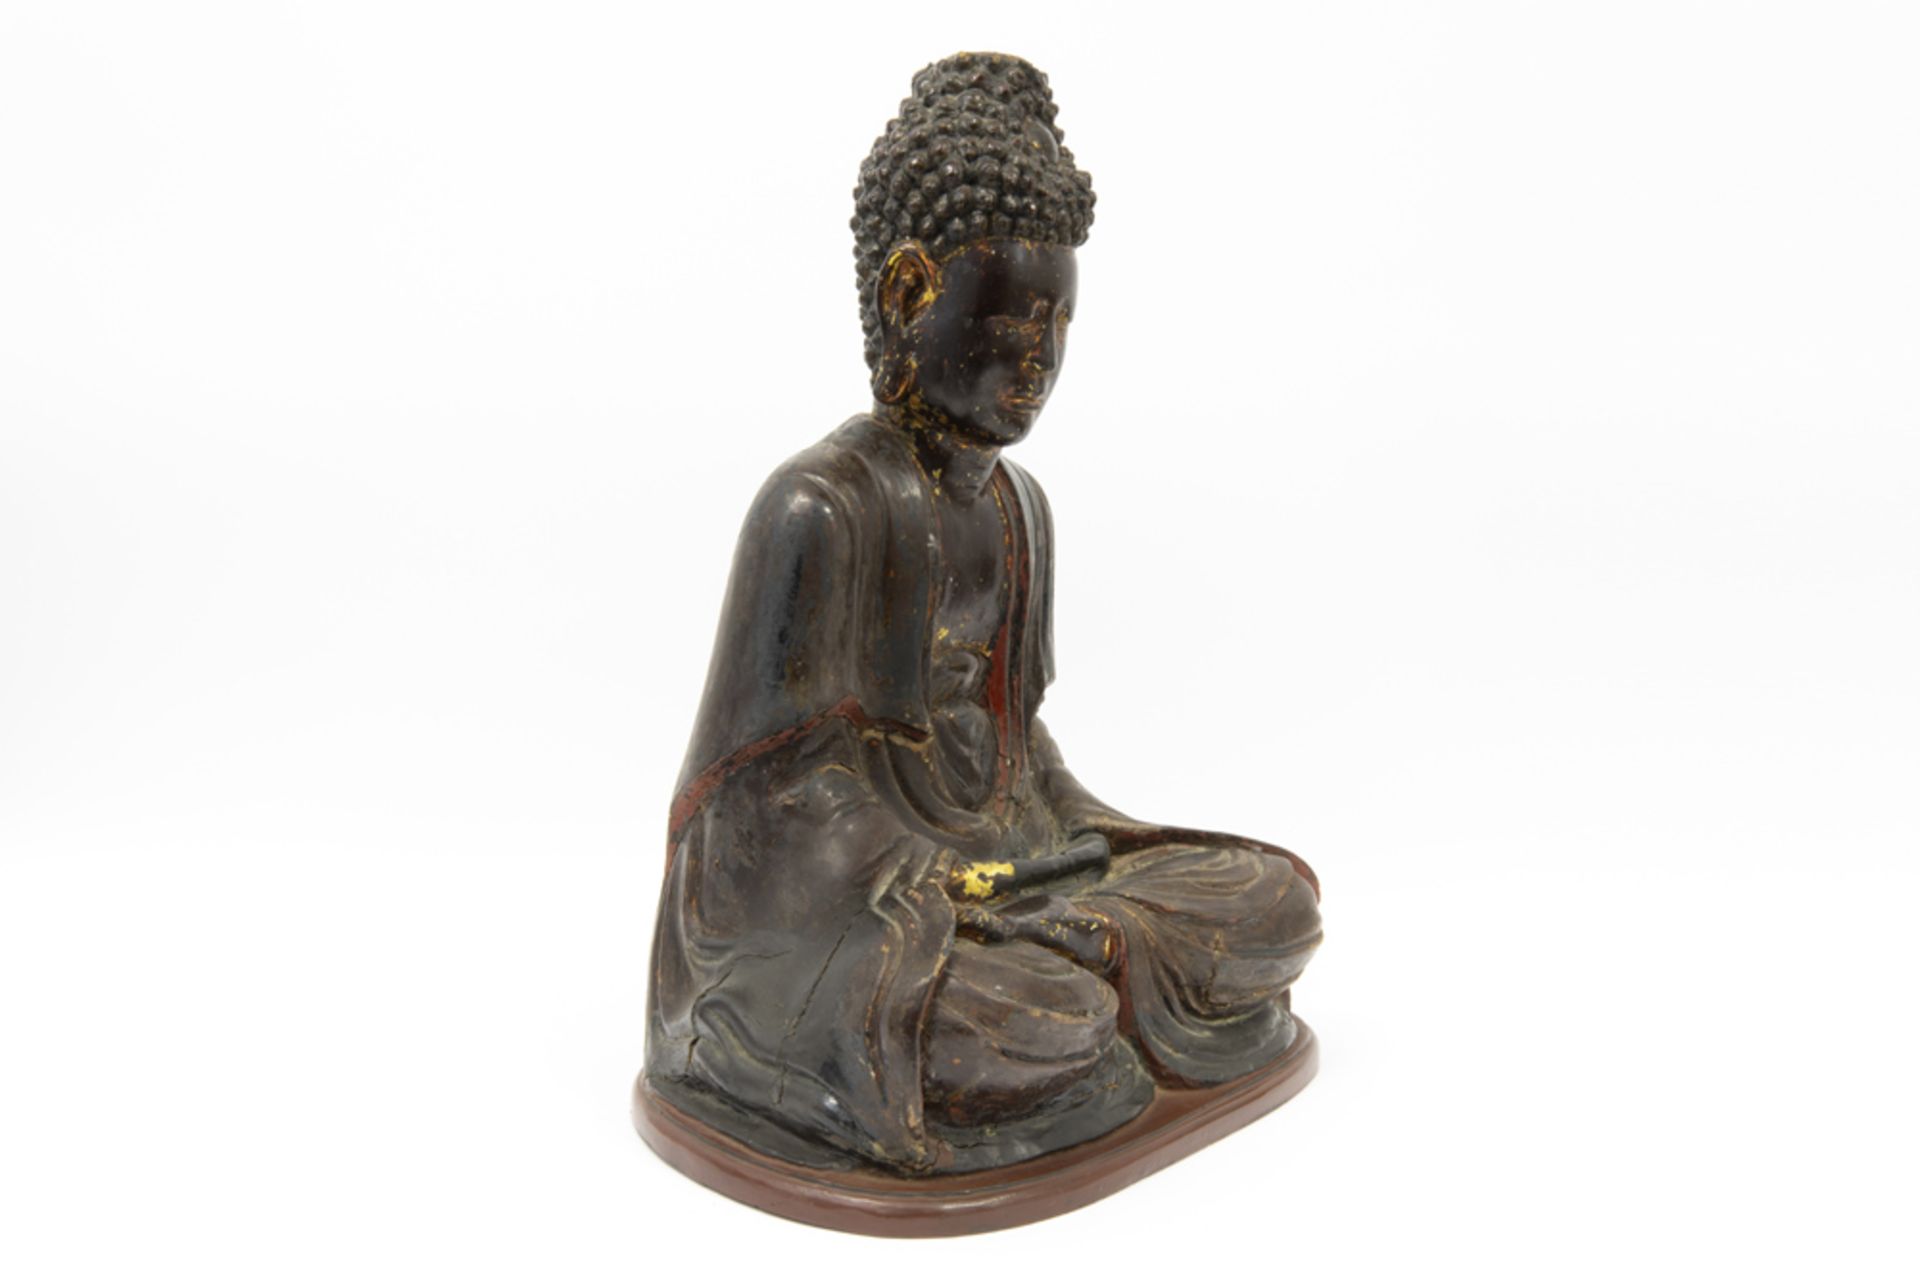 19th Cent. Vietnamese "Buddha" sculpture in lacquered teak wood with remains of gilding || VIETNAM - - Image 3 of 5